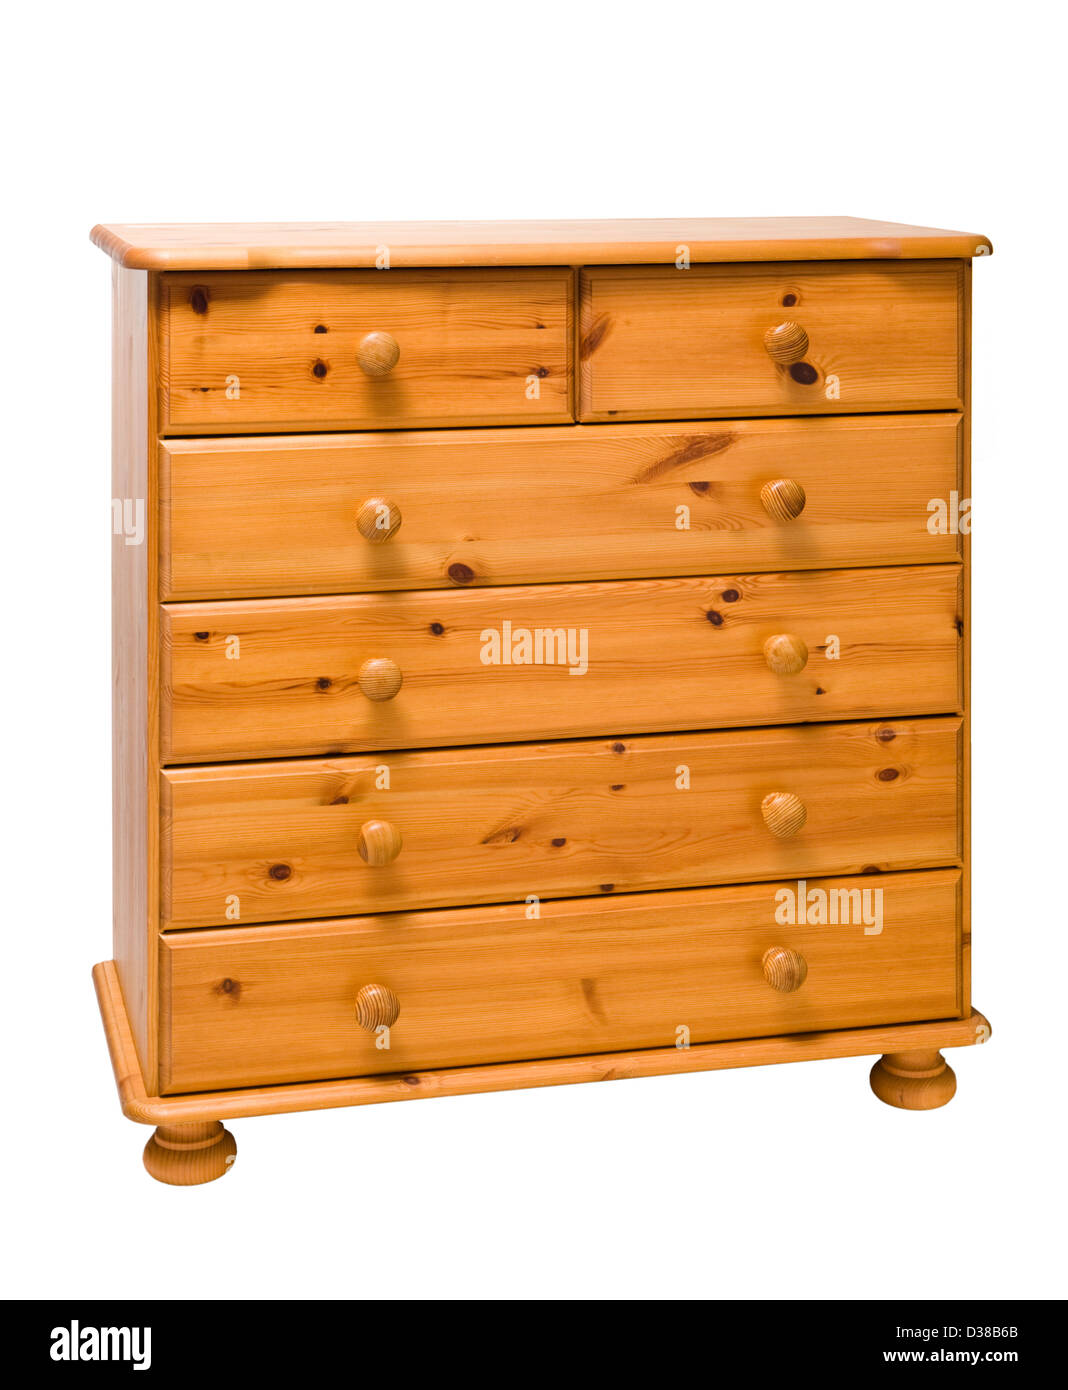 Chest of drawers. Stock Photo